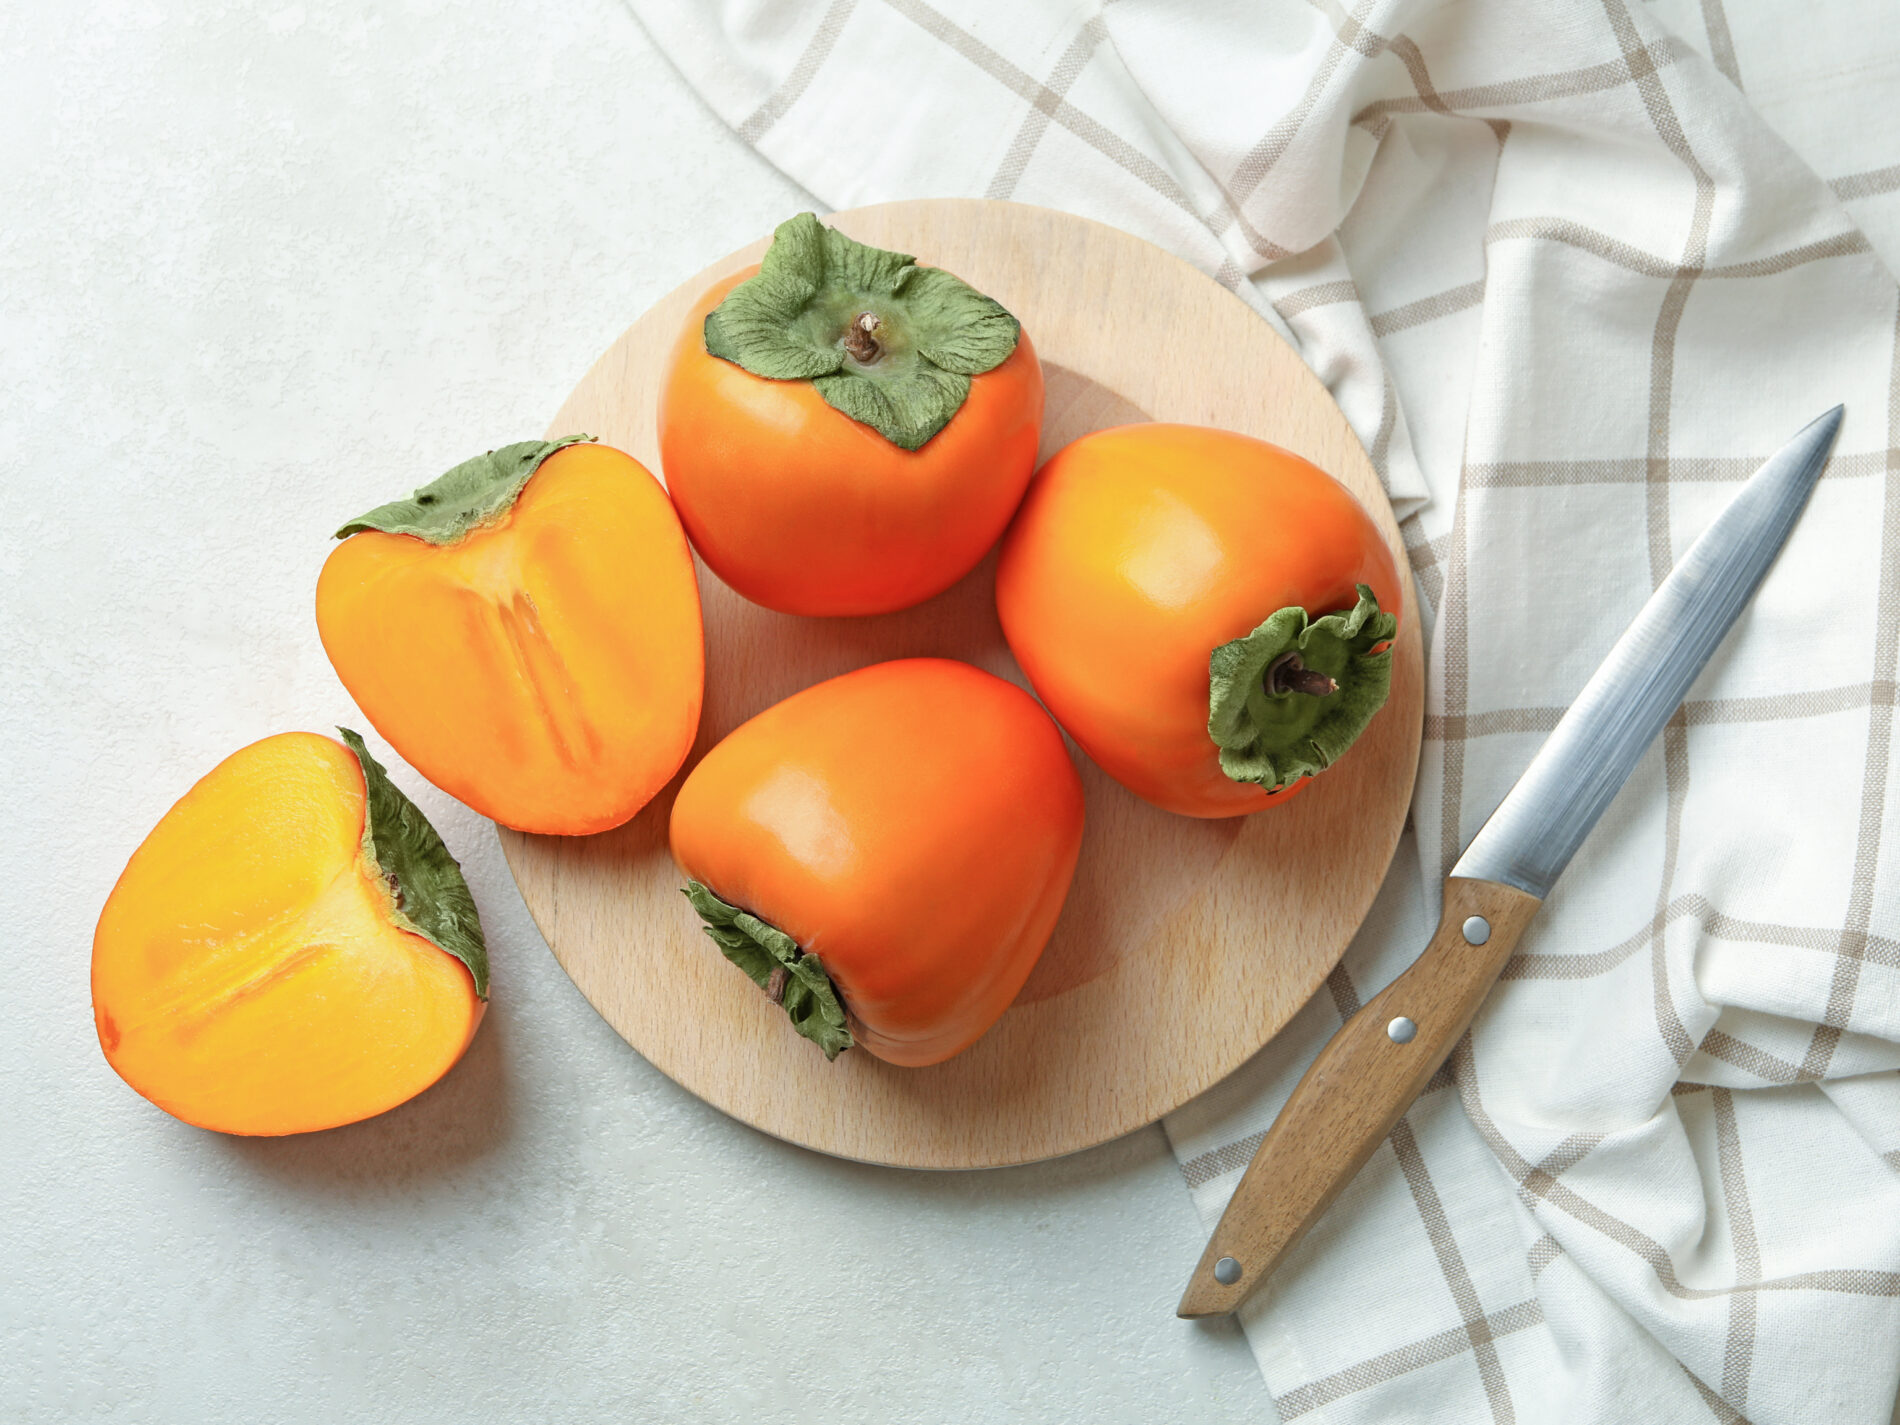 Plate with persimmon, knife and kitchen towel on white table